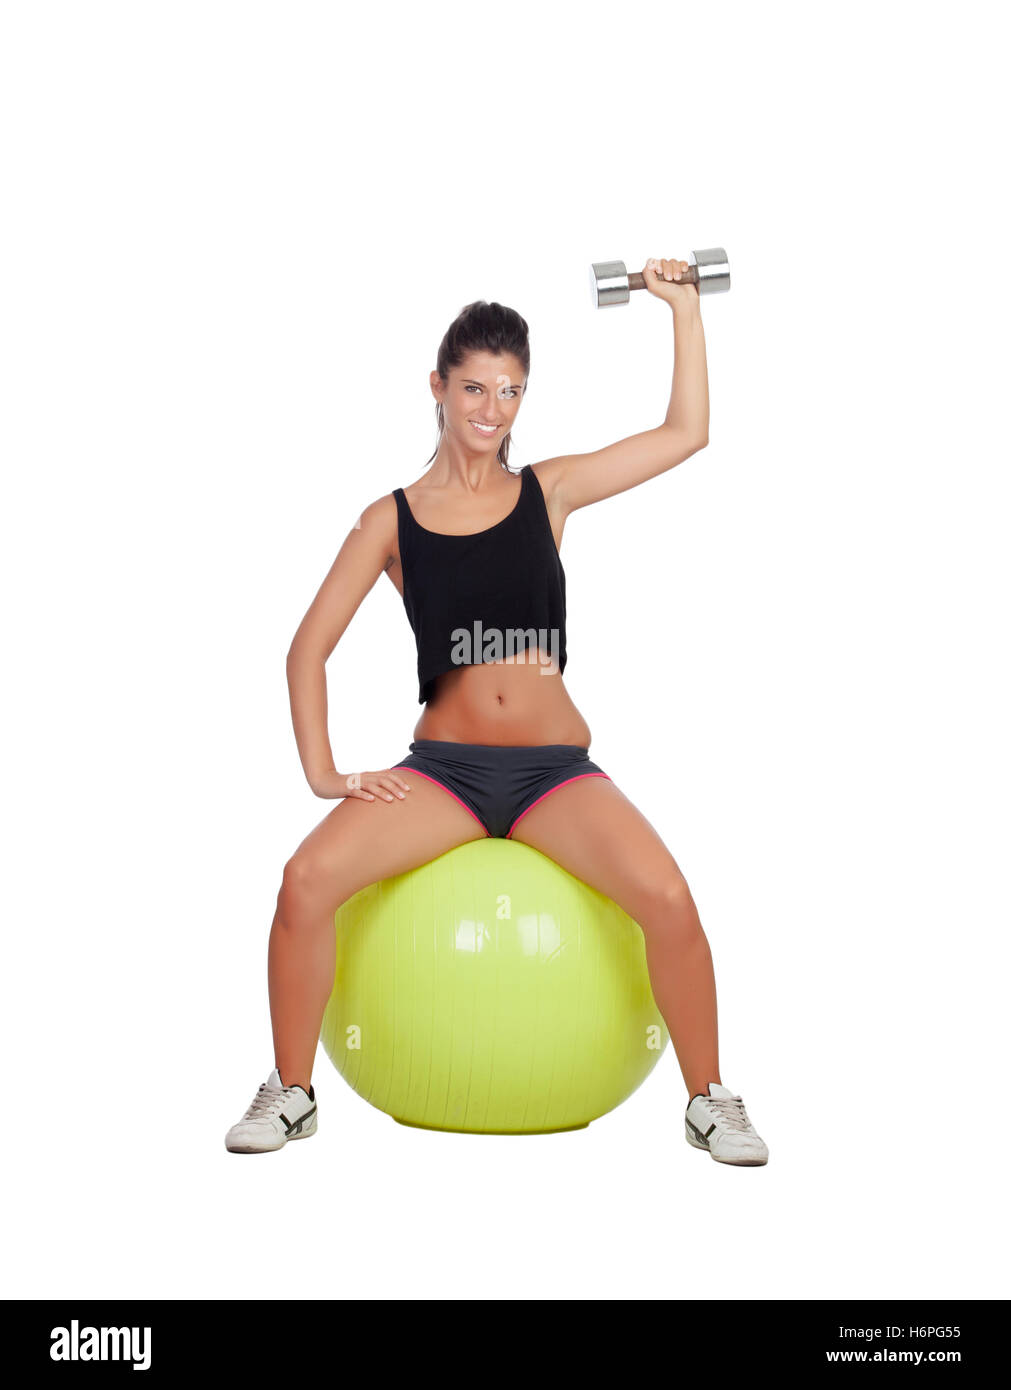 Attractive girl lifting weights sitting on a ball isolated on white background Stock Photo